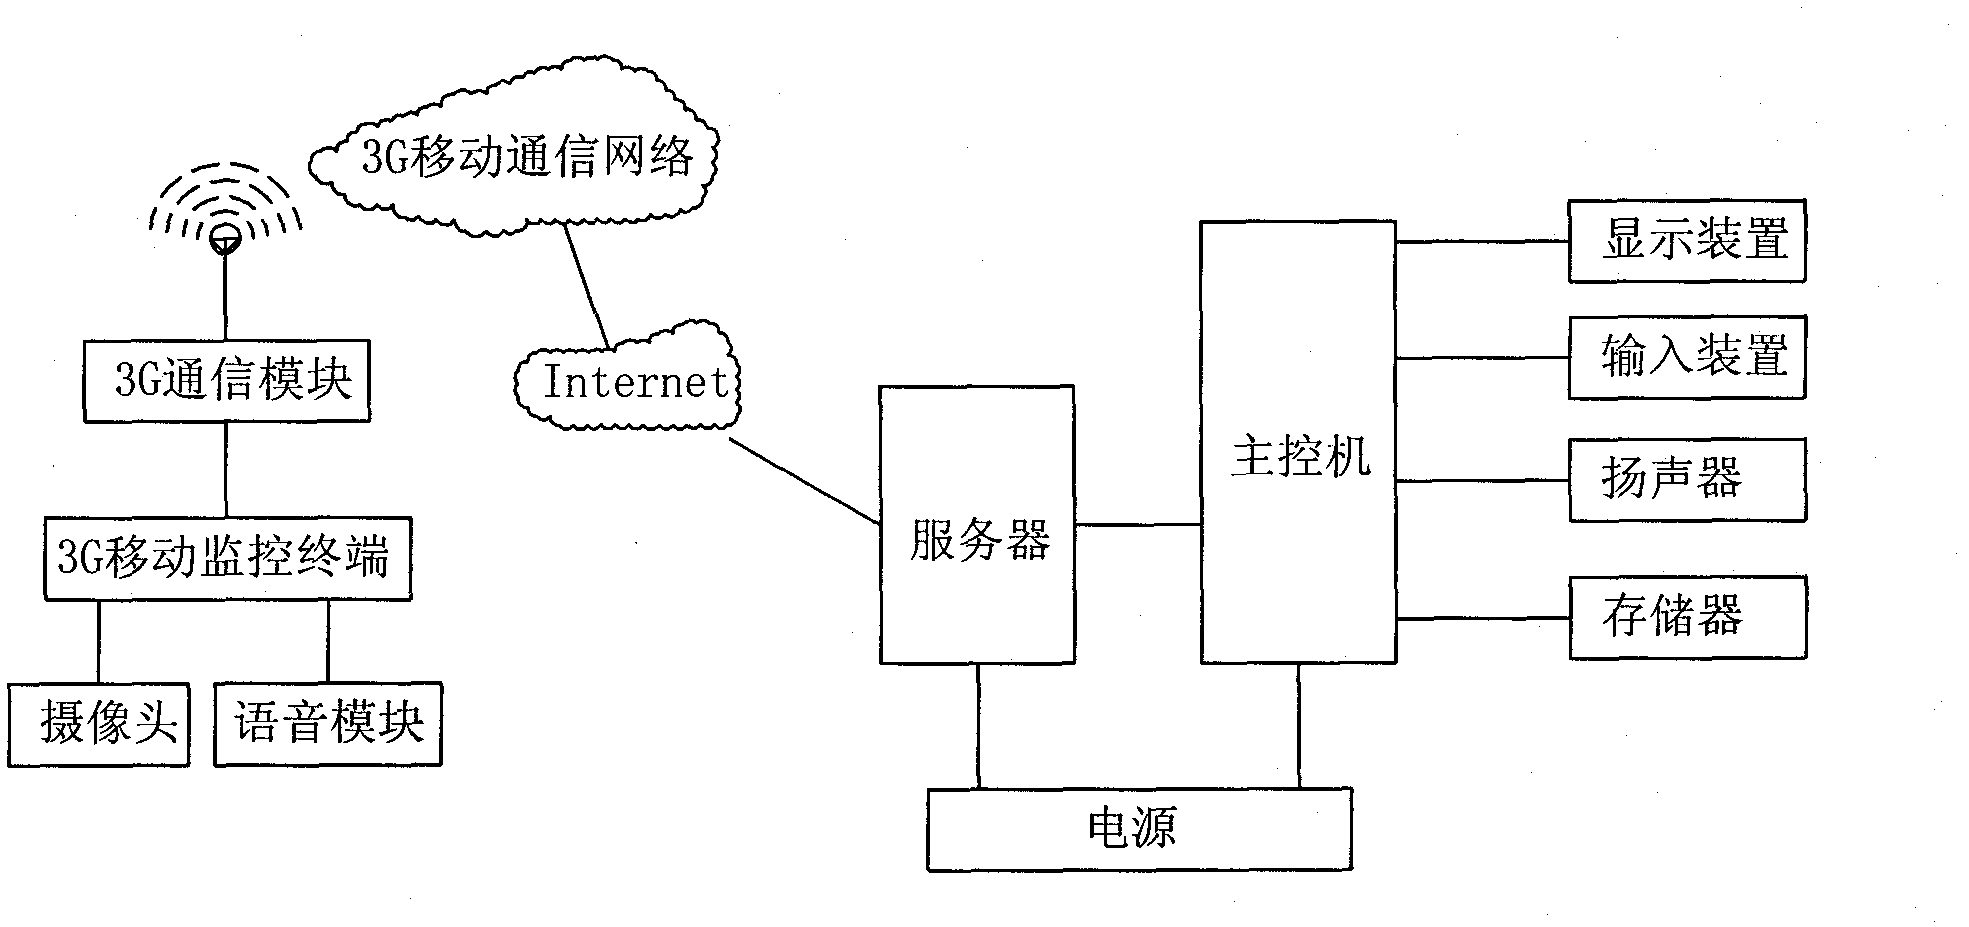 Monitoring system and method based on 3G (third generation) wireless communication network